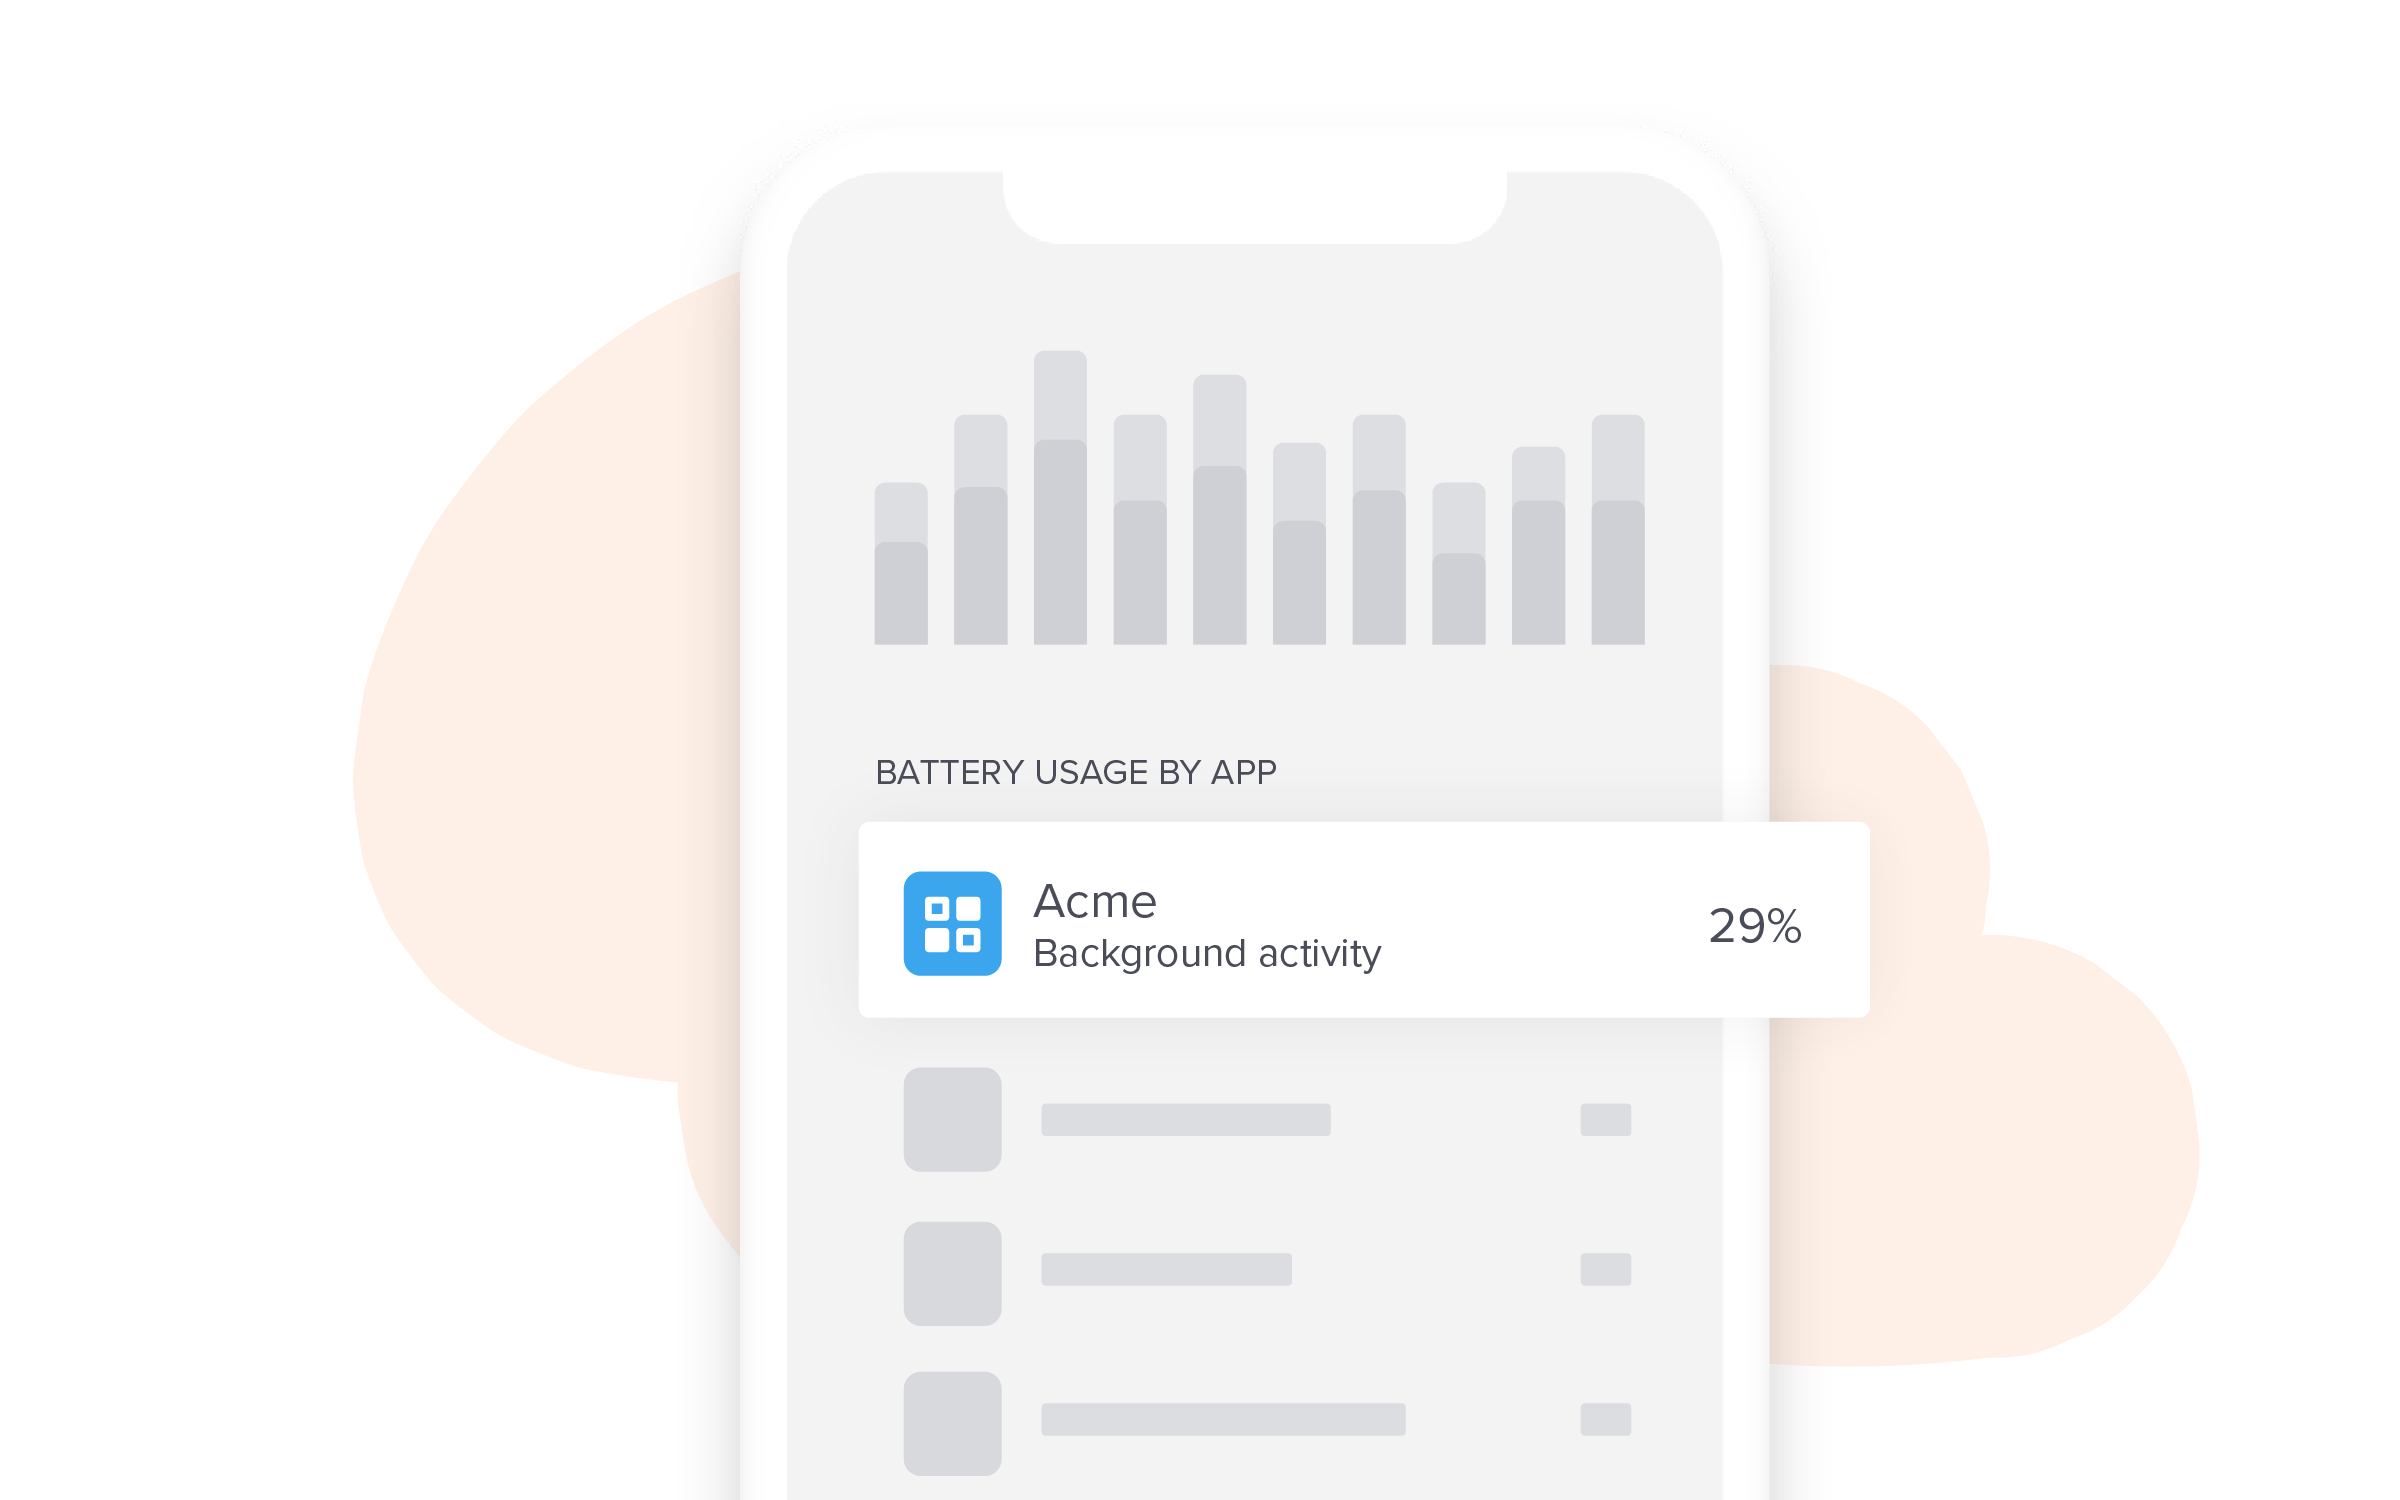 Mobile battery usage